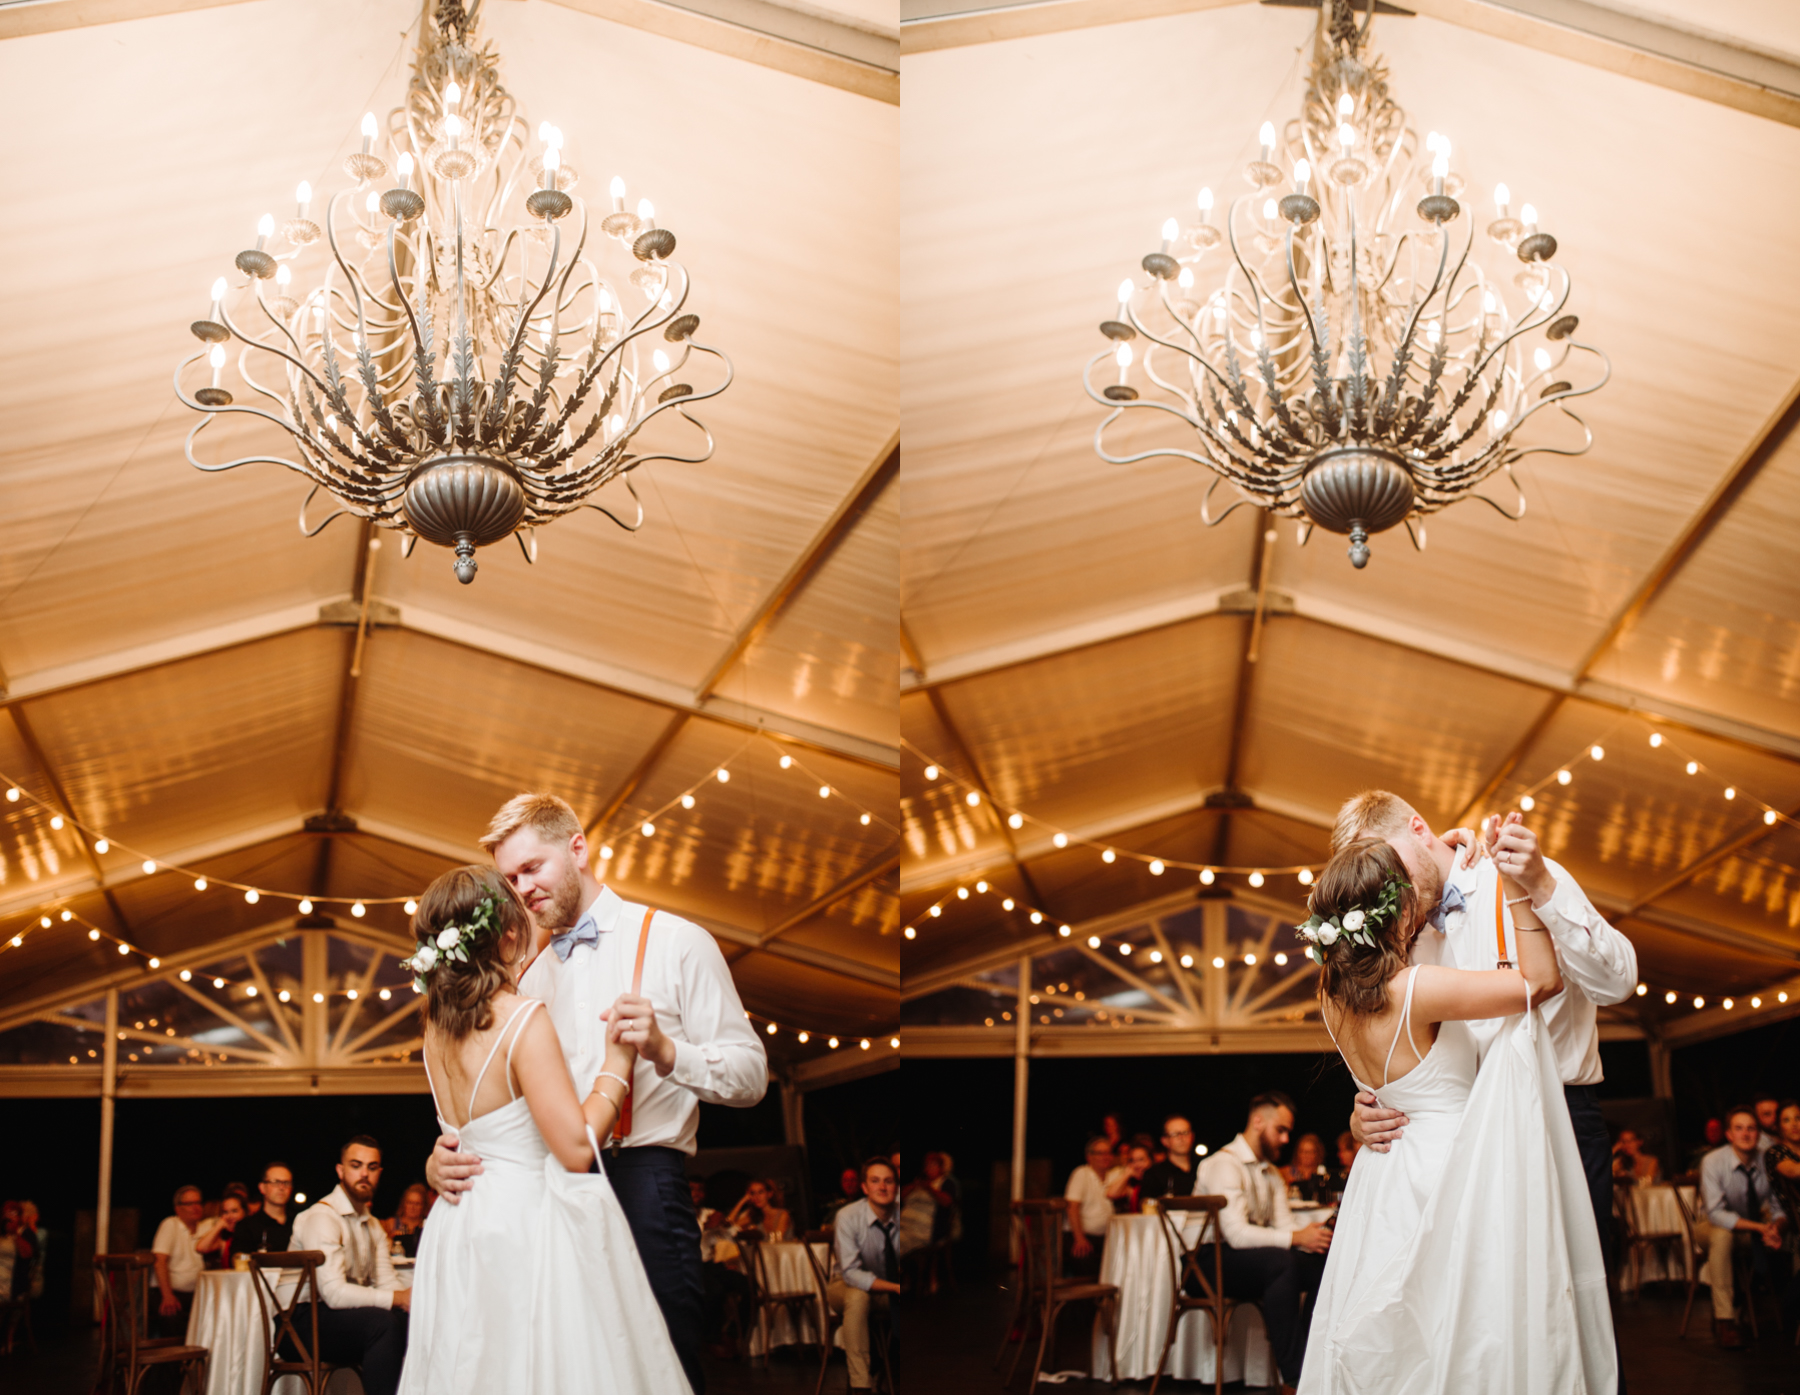 First dance at a Sunny summer wedding at Dara's Garden in Knoxville, Tennessee 